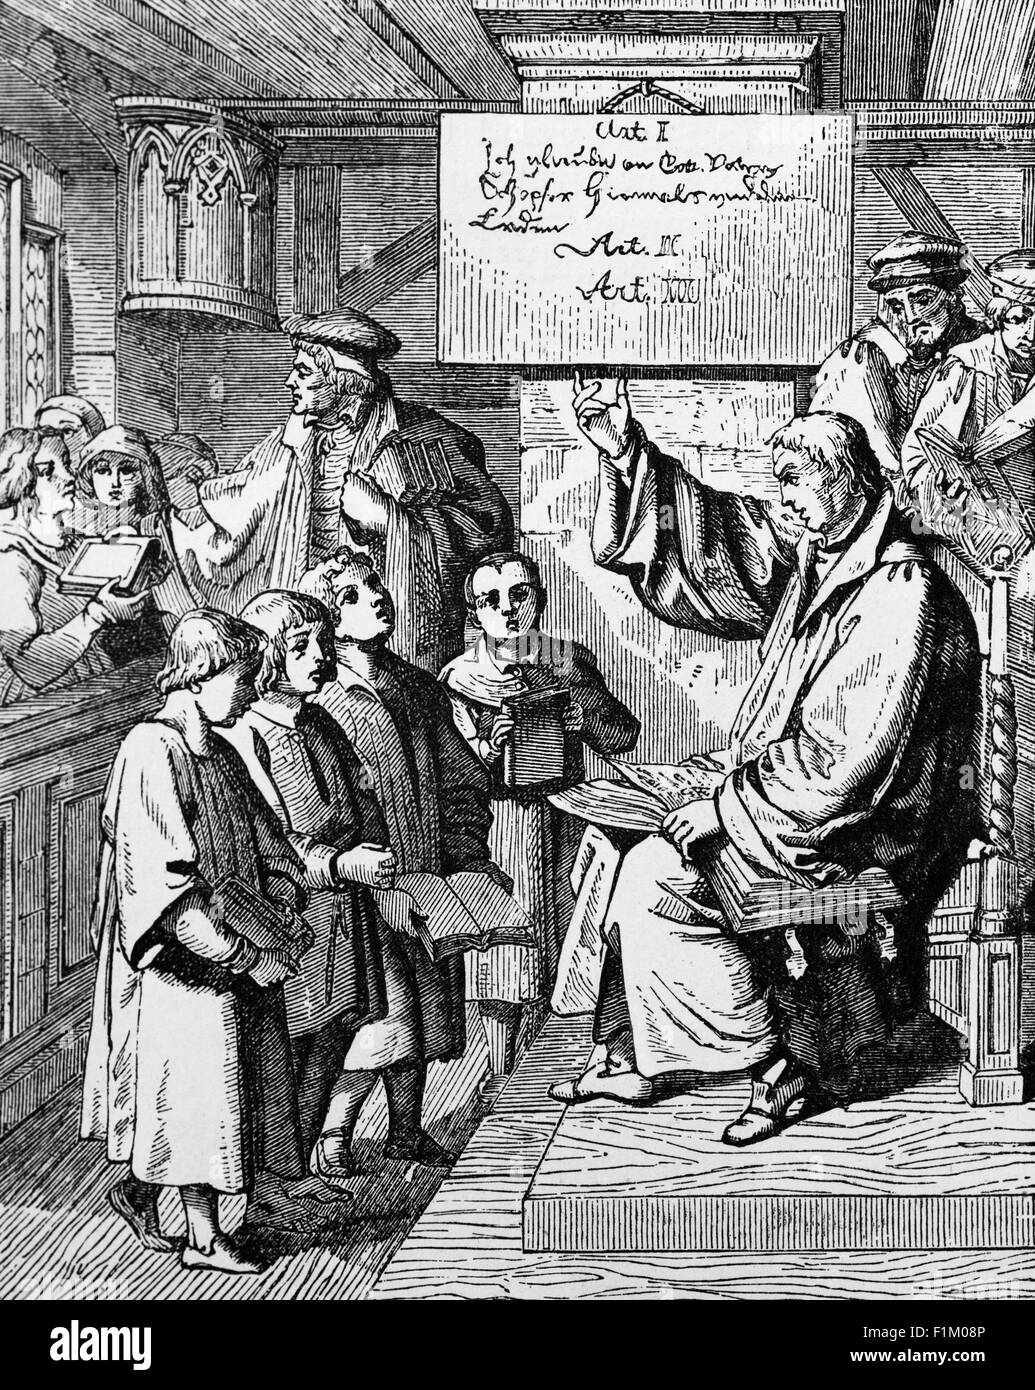 Martin Luther teaching Children during the Reformation in Germany. Martin Luther (1483-1546) was a German professor of theology, priest, author, composer, Augustinian monk, and a seminal figure in the Reformation. Ordained to the priesthood in 1507 Luther came to reject several teachings and practices of the Roman Catholic Church; in particular, he disputed the view on indulgences. Luther proposed an academic discussion of the practice and efficacy of indulgences in his Ninety-five Theses of 1517. Stock Photo